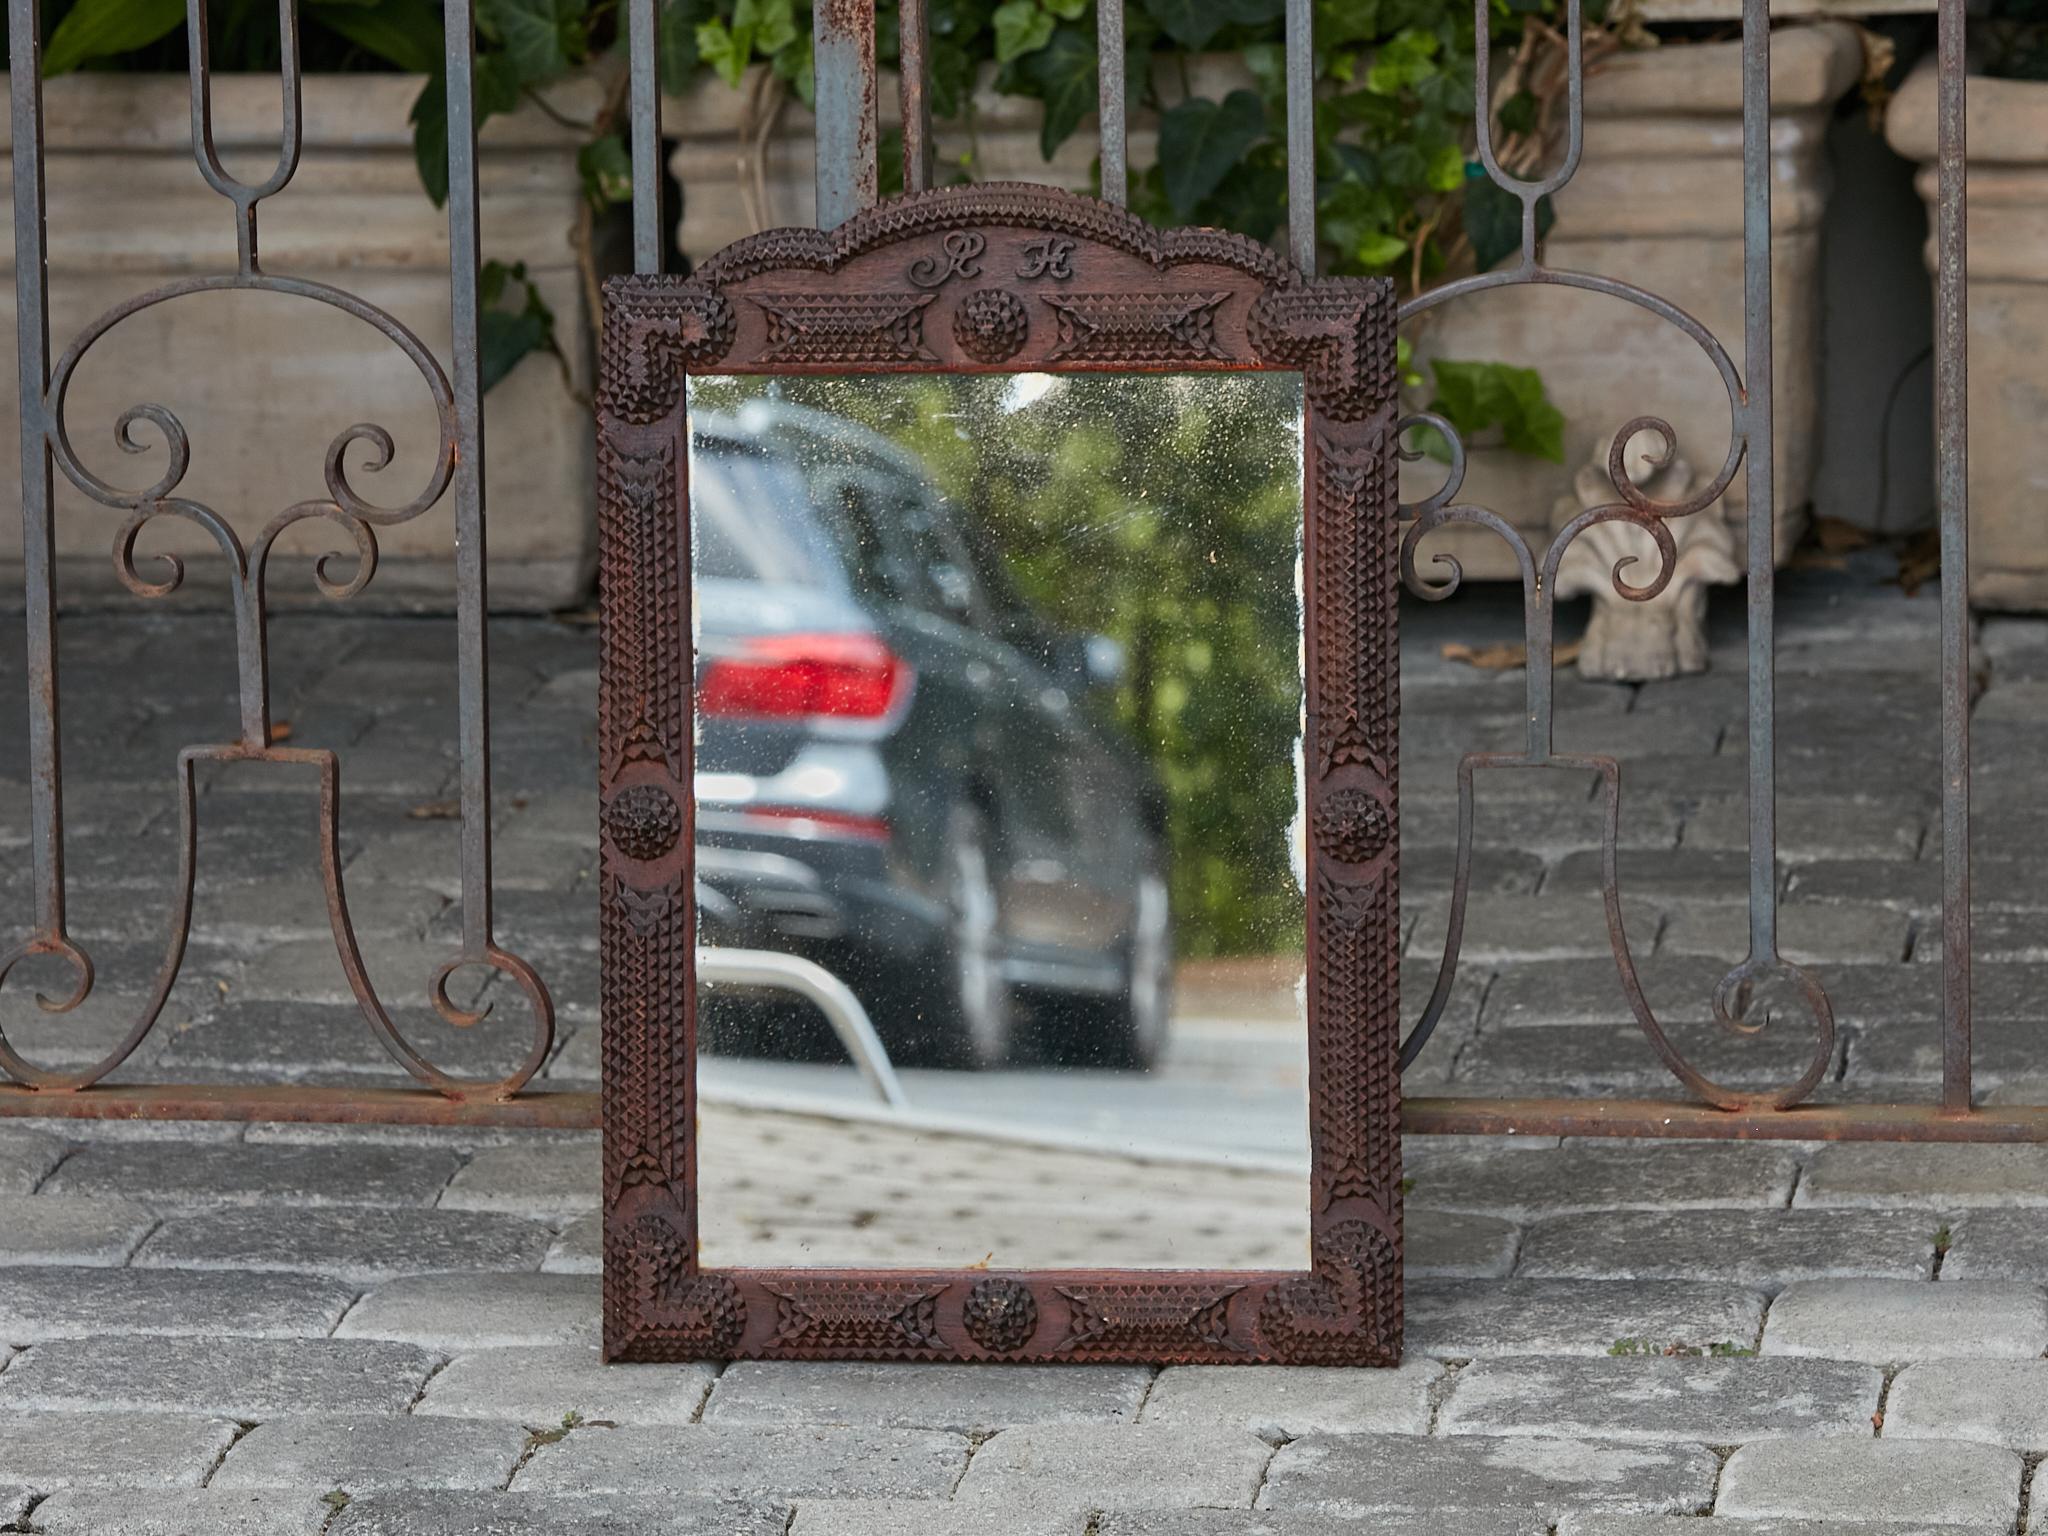 A French Tramp Art Turn of the Century mirror from circa 1900 with hand-carved crest and monogram. 
Immerse yourself in the exquisite craftsmanship and unique charm of this French Tramp Art Turn of the Century mirror from circa 1900. This